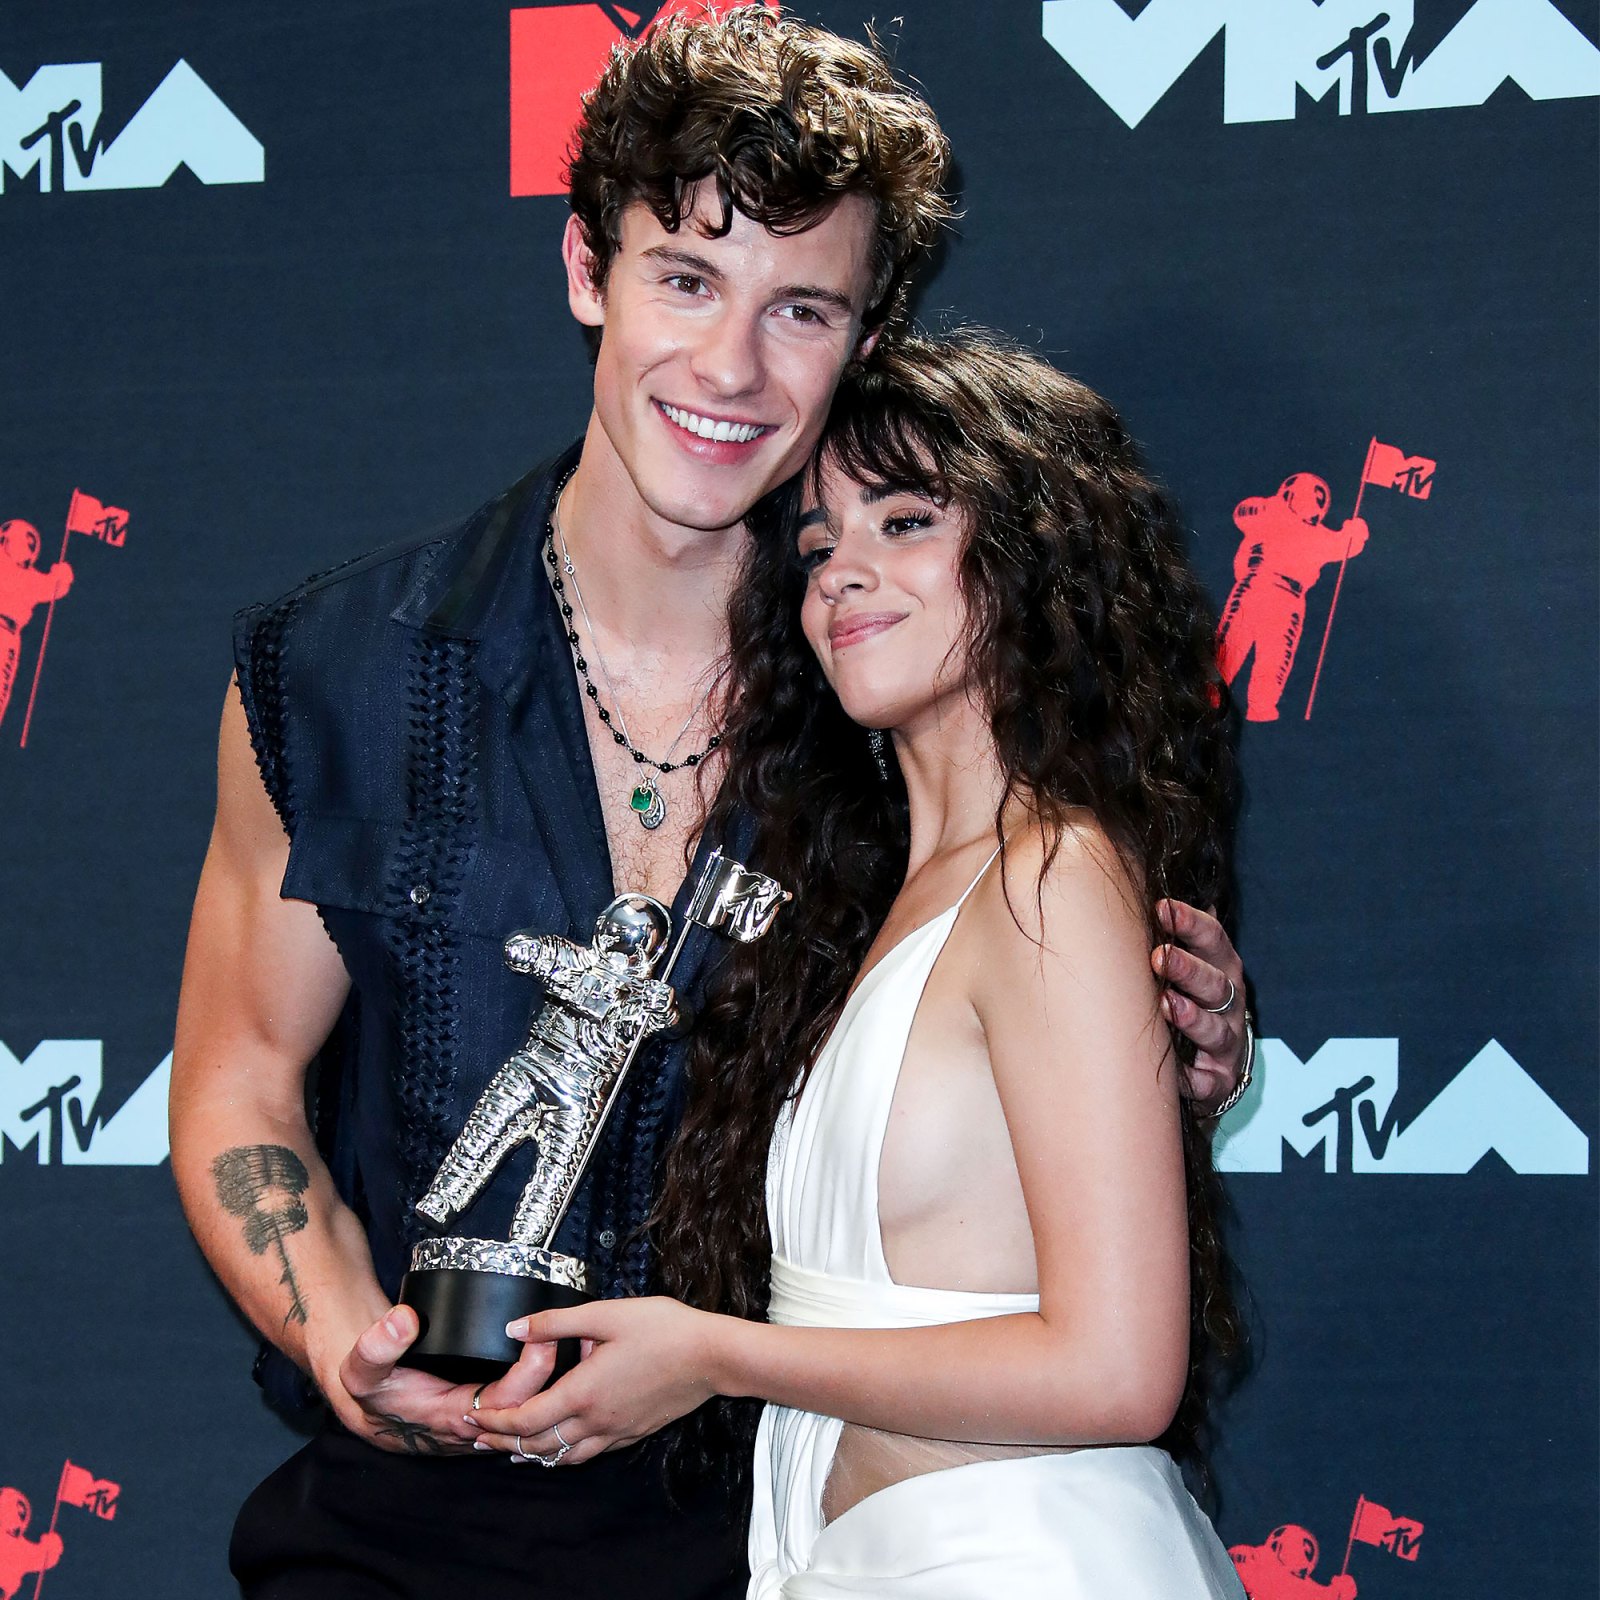 Camila Cabello and Shawn Mendes Packed on the PDA 2 Weeks Before Split